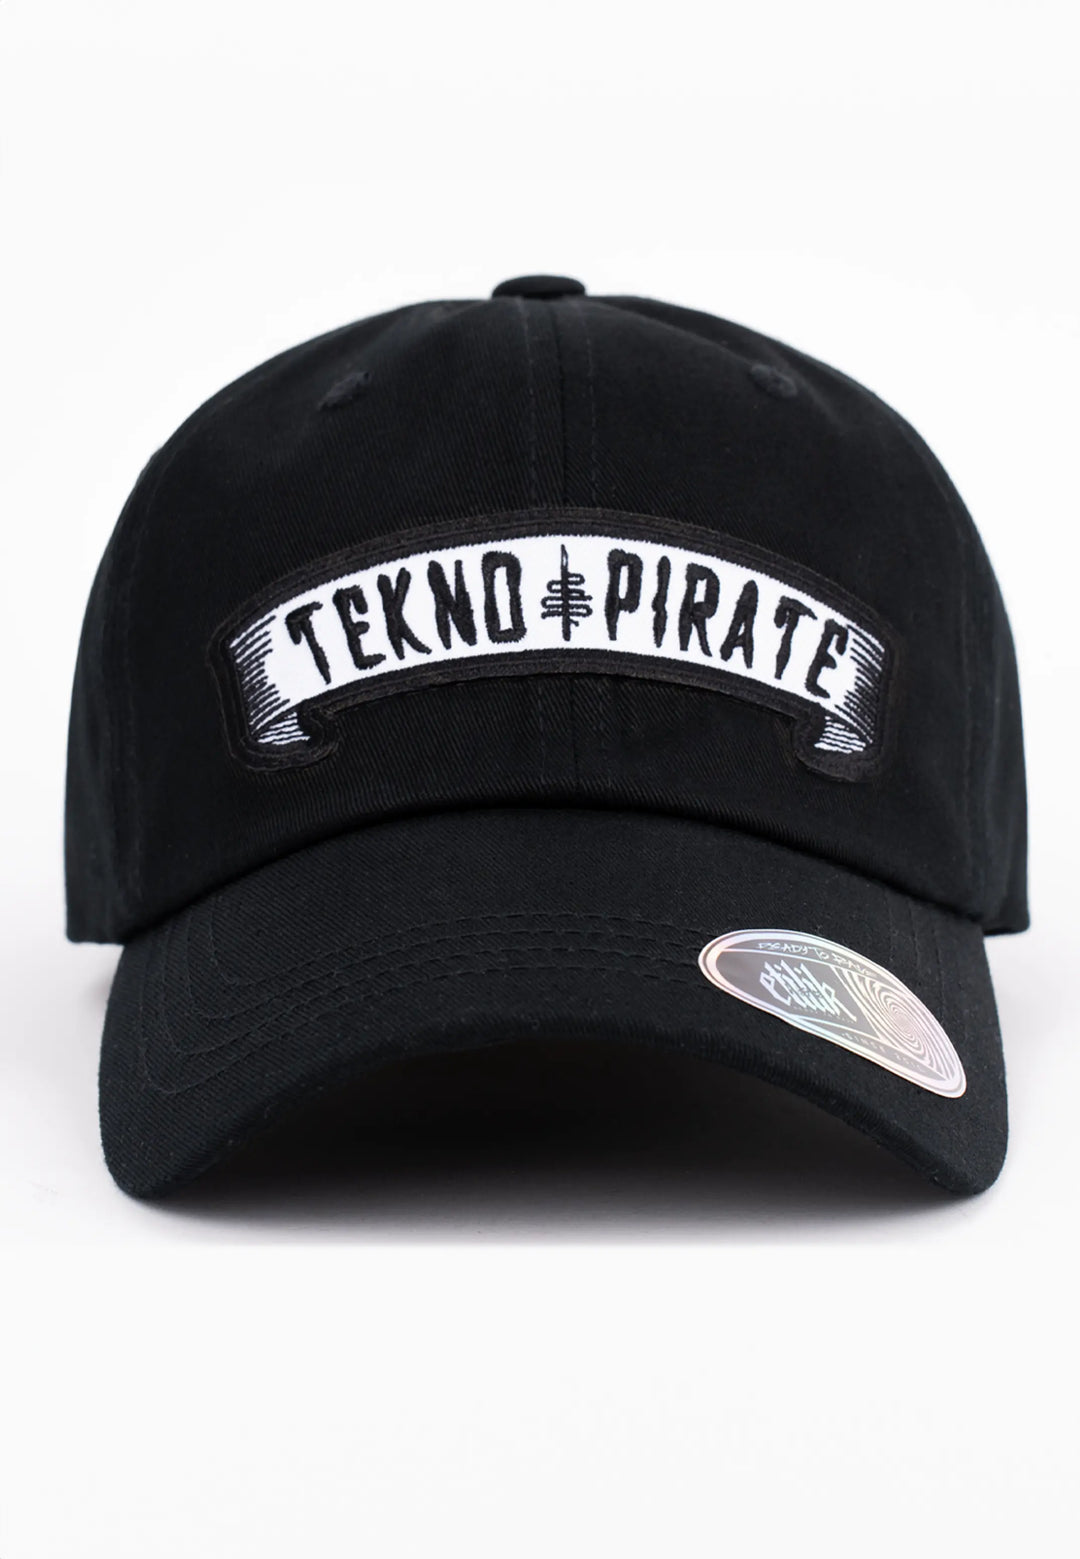 Tekno Pirate- 5 Panels Curved